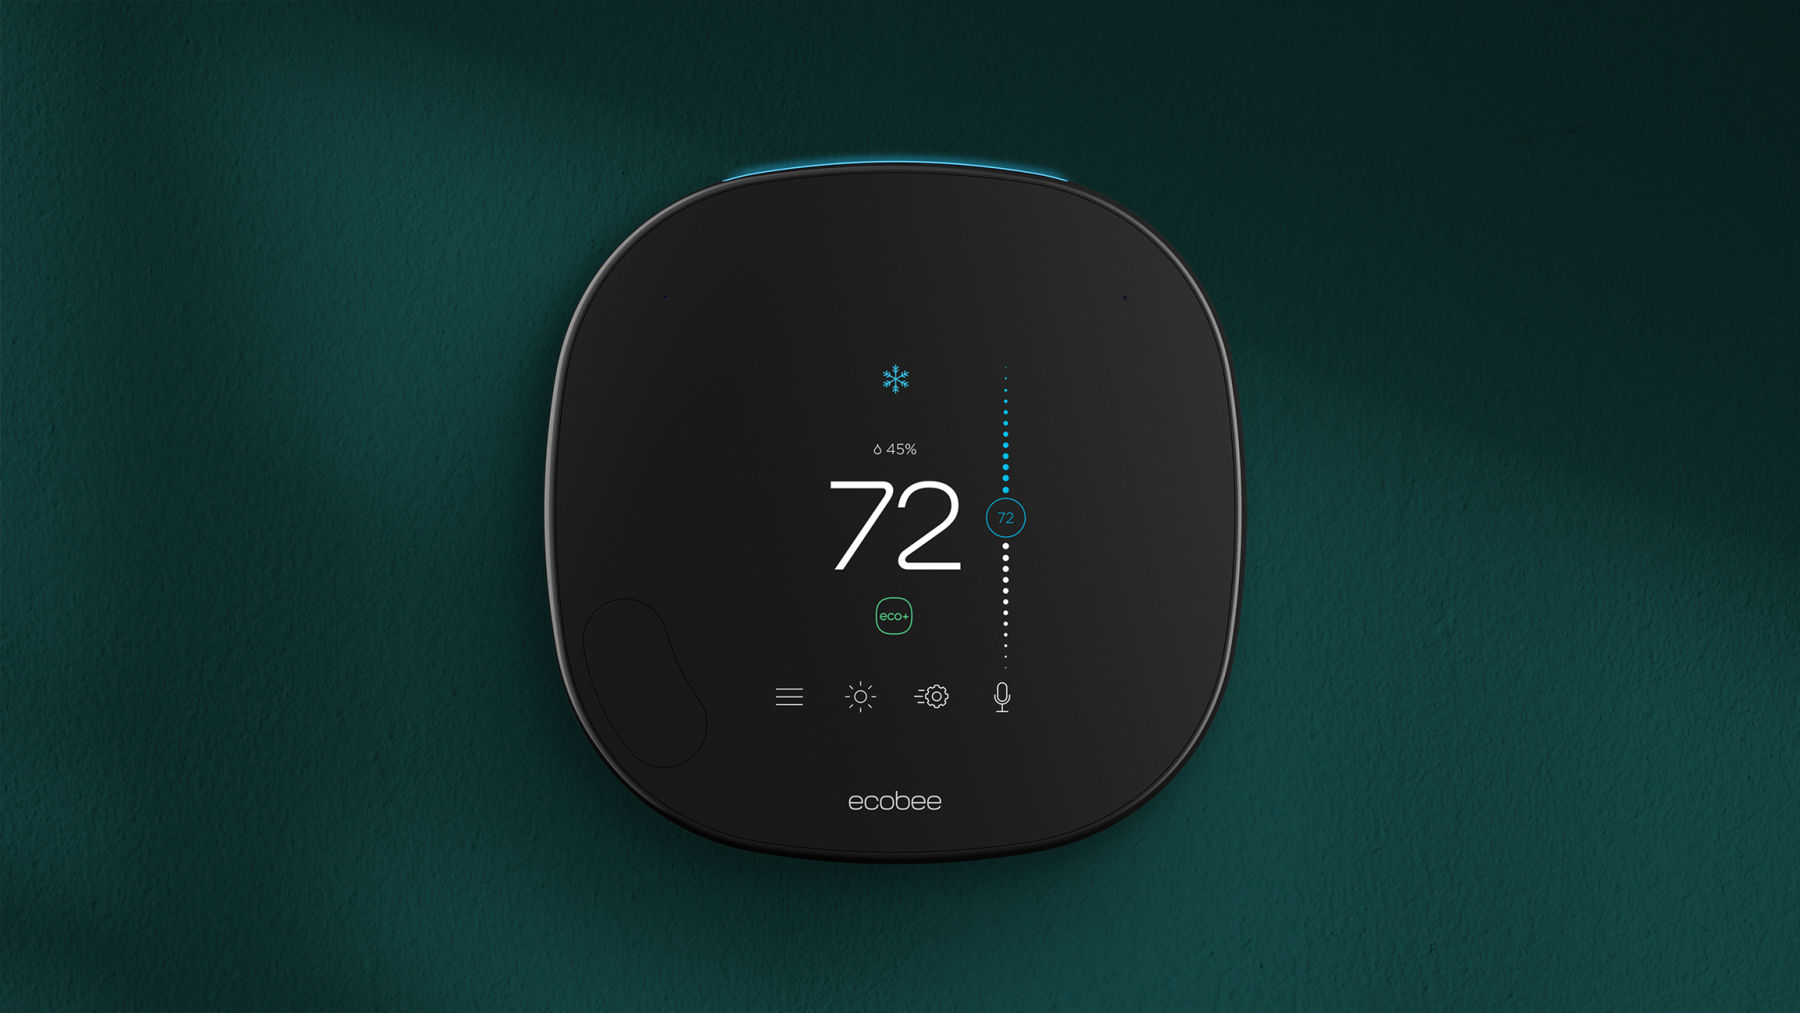 ecobee thermostat on a green background.